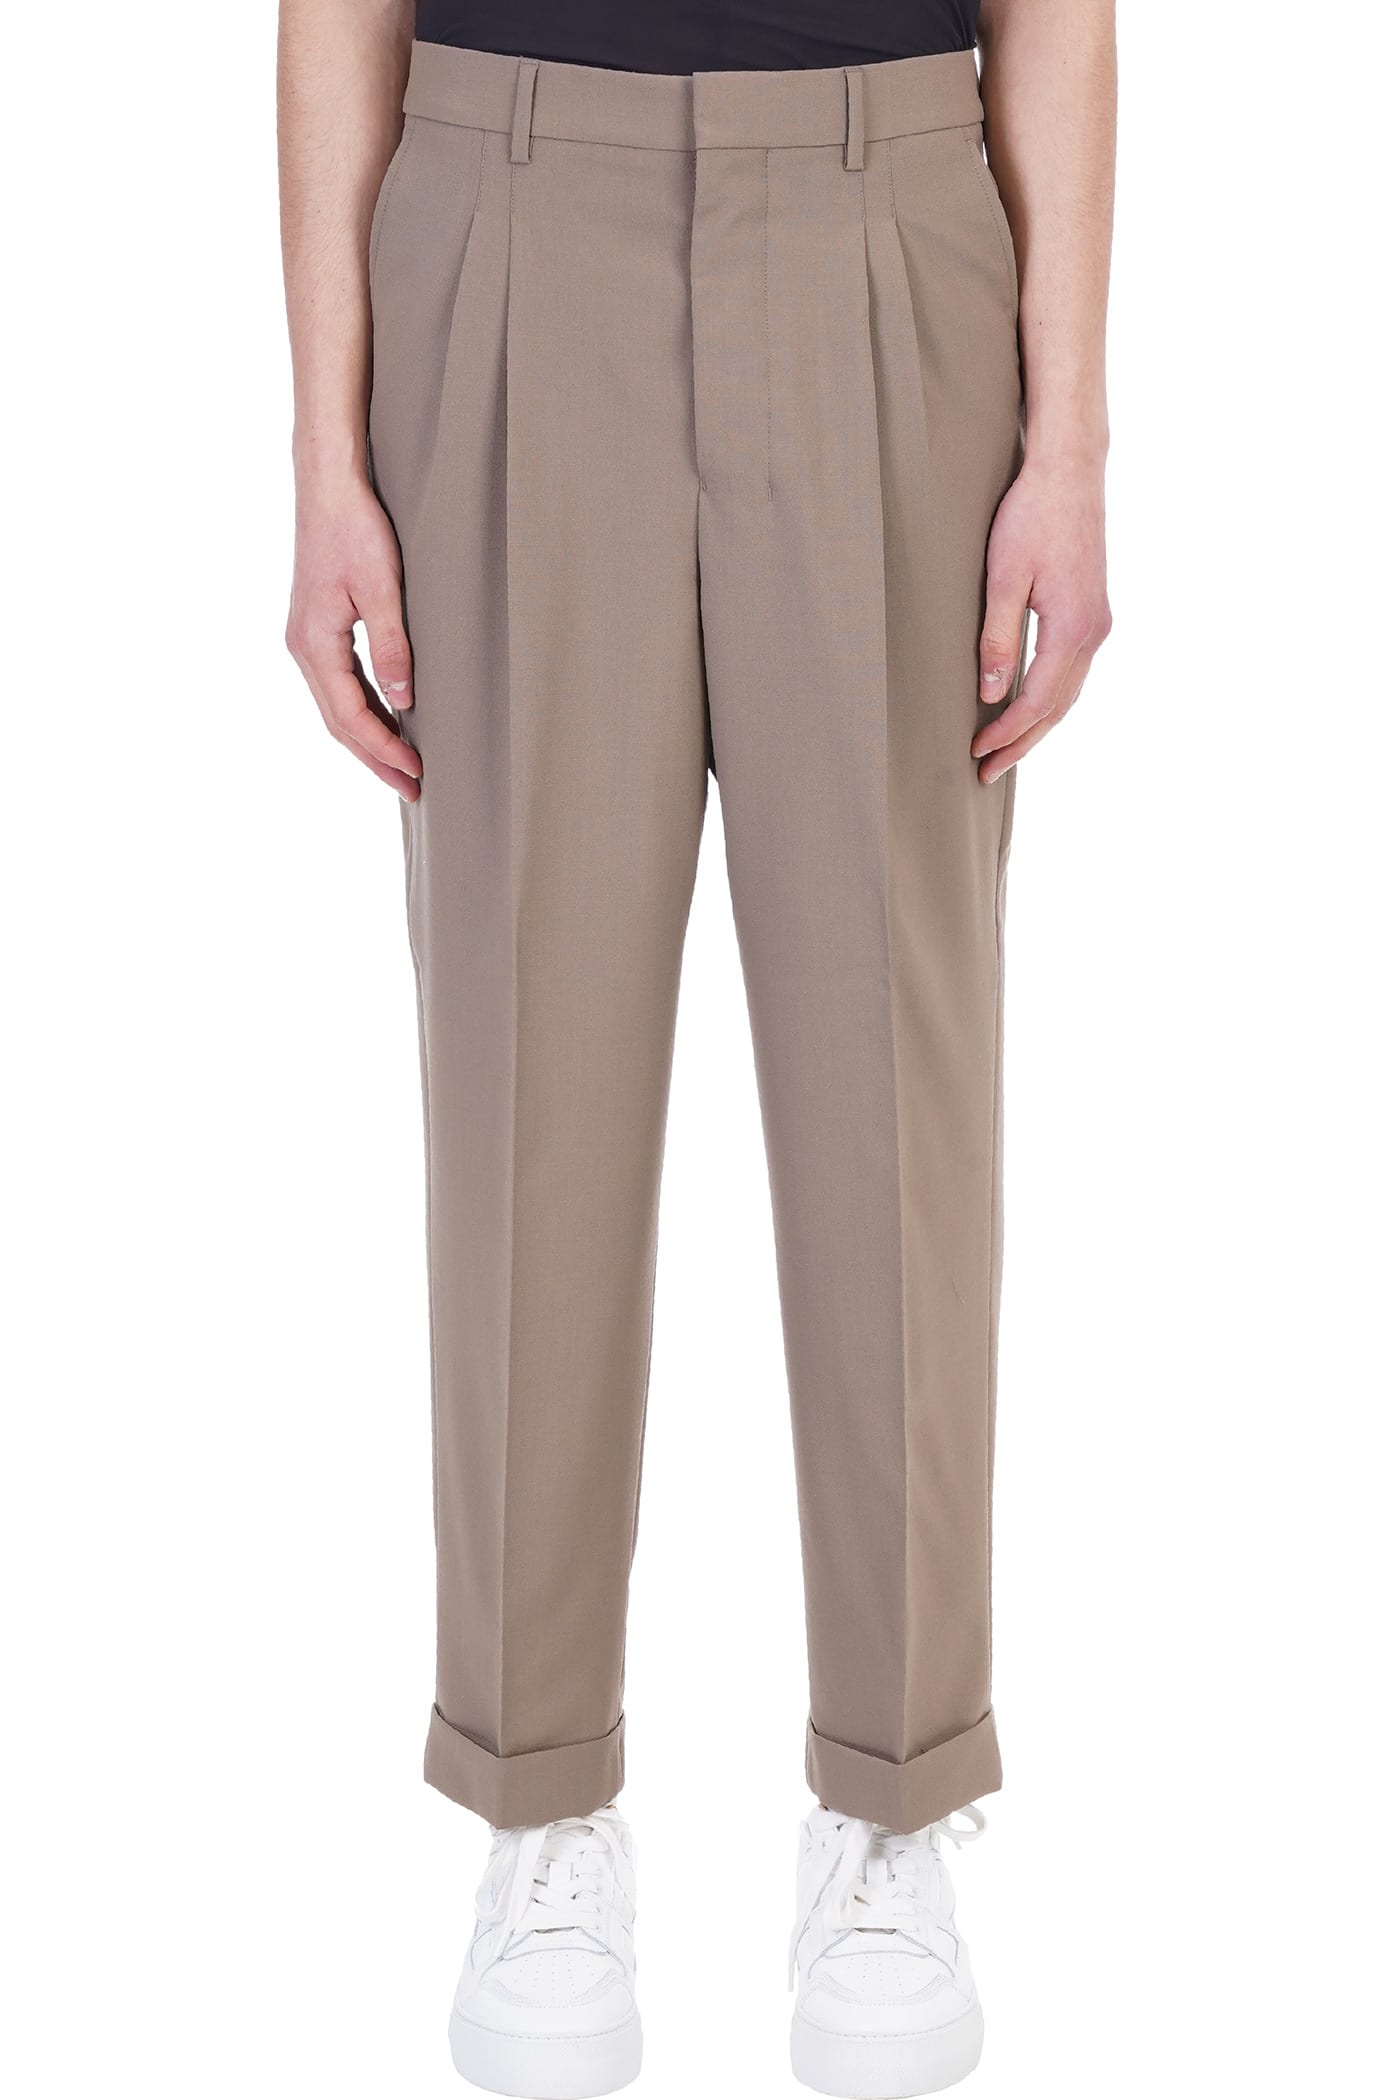 Ami Alexandre Mattiussi Pants In Taupe Wool